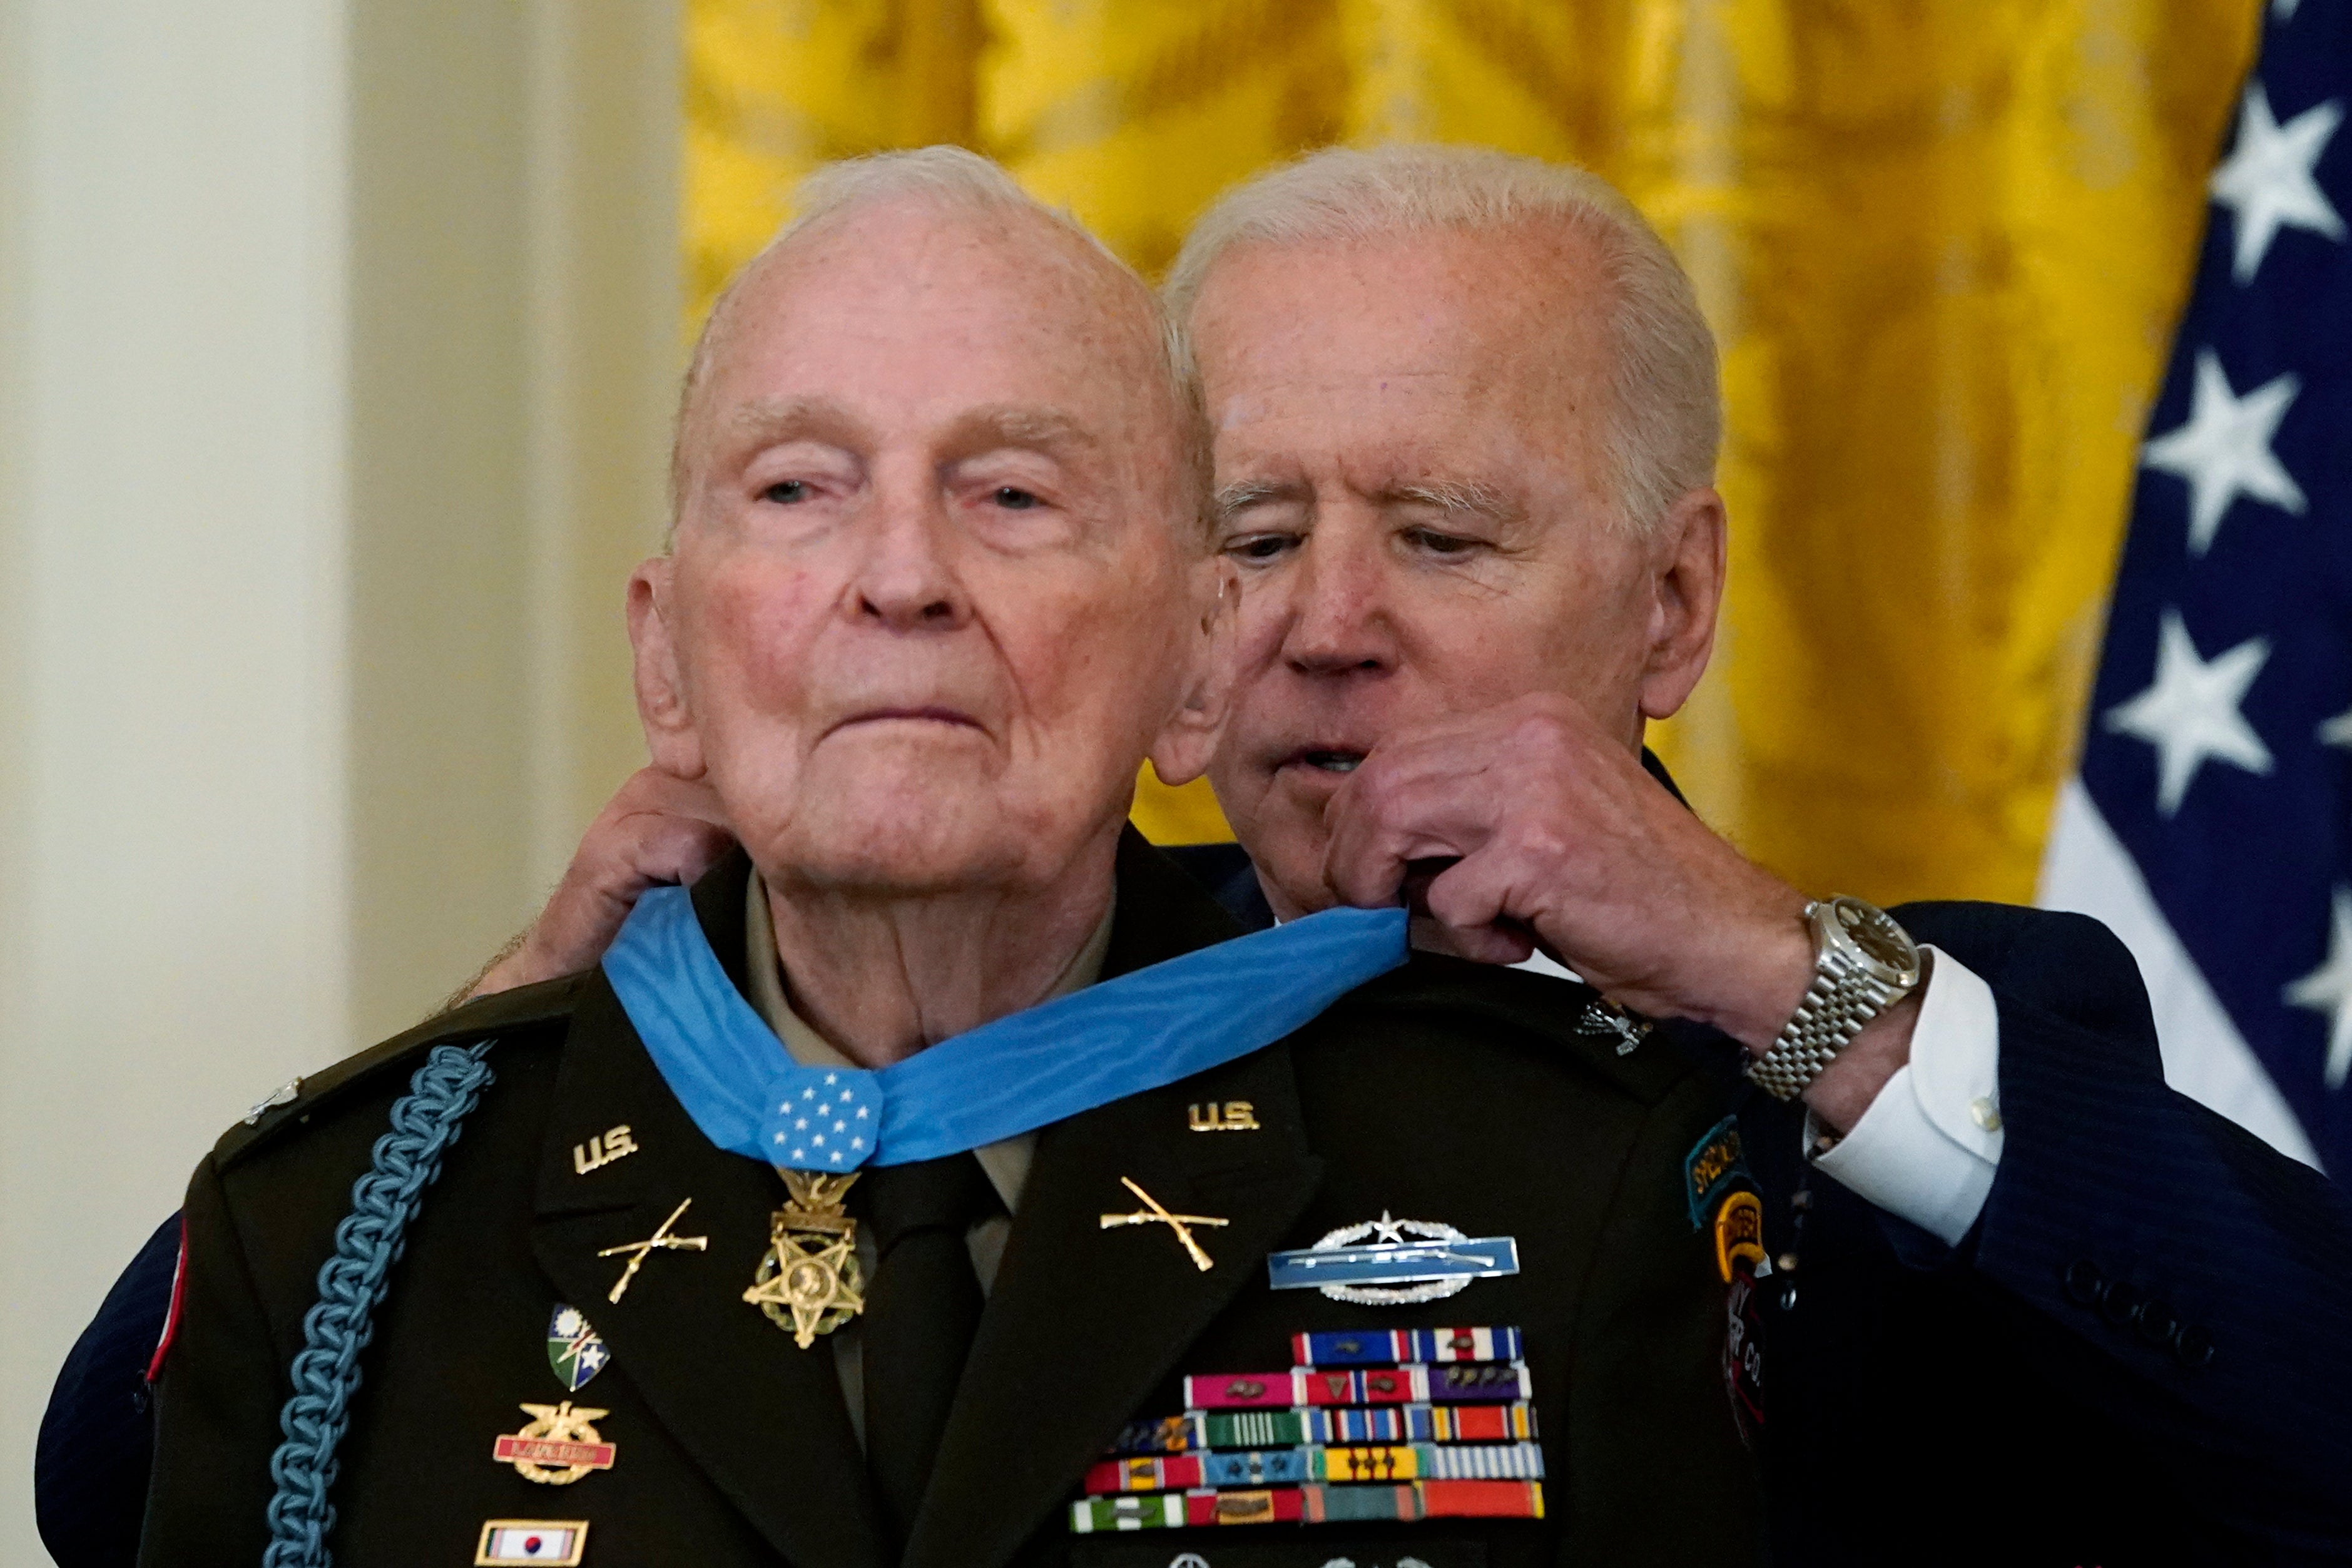 do medal of honor ceremonies make you cry